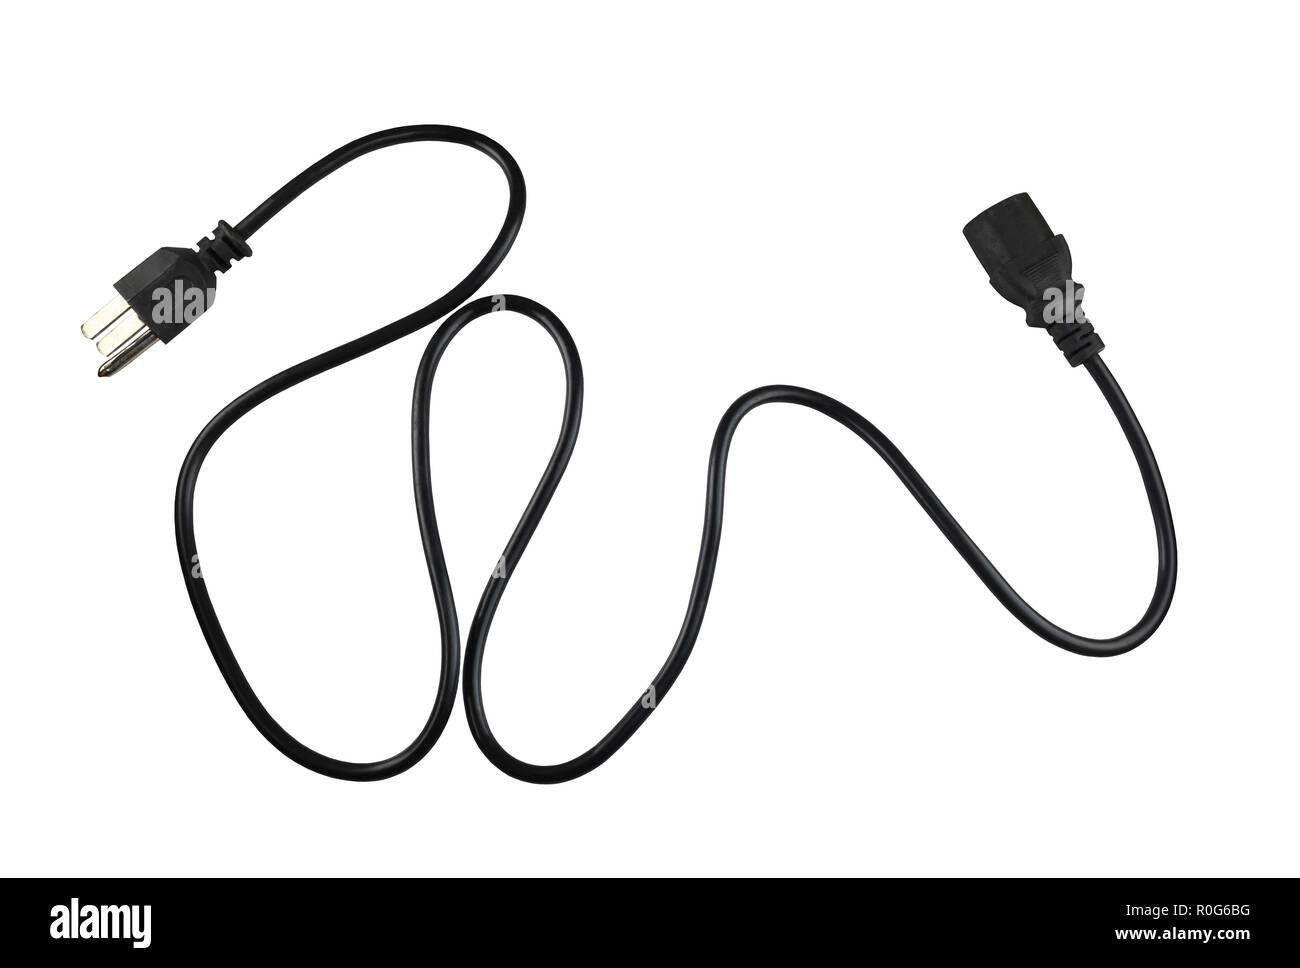 Black power cable line isolated on white background and have clipping paths. Stock Photo